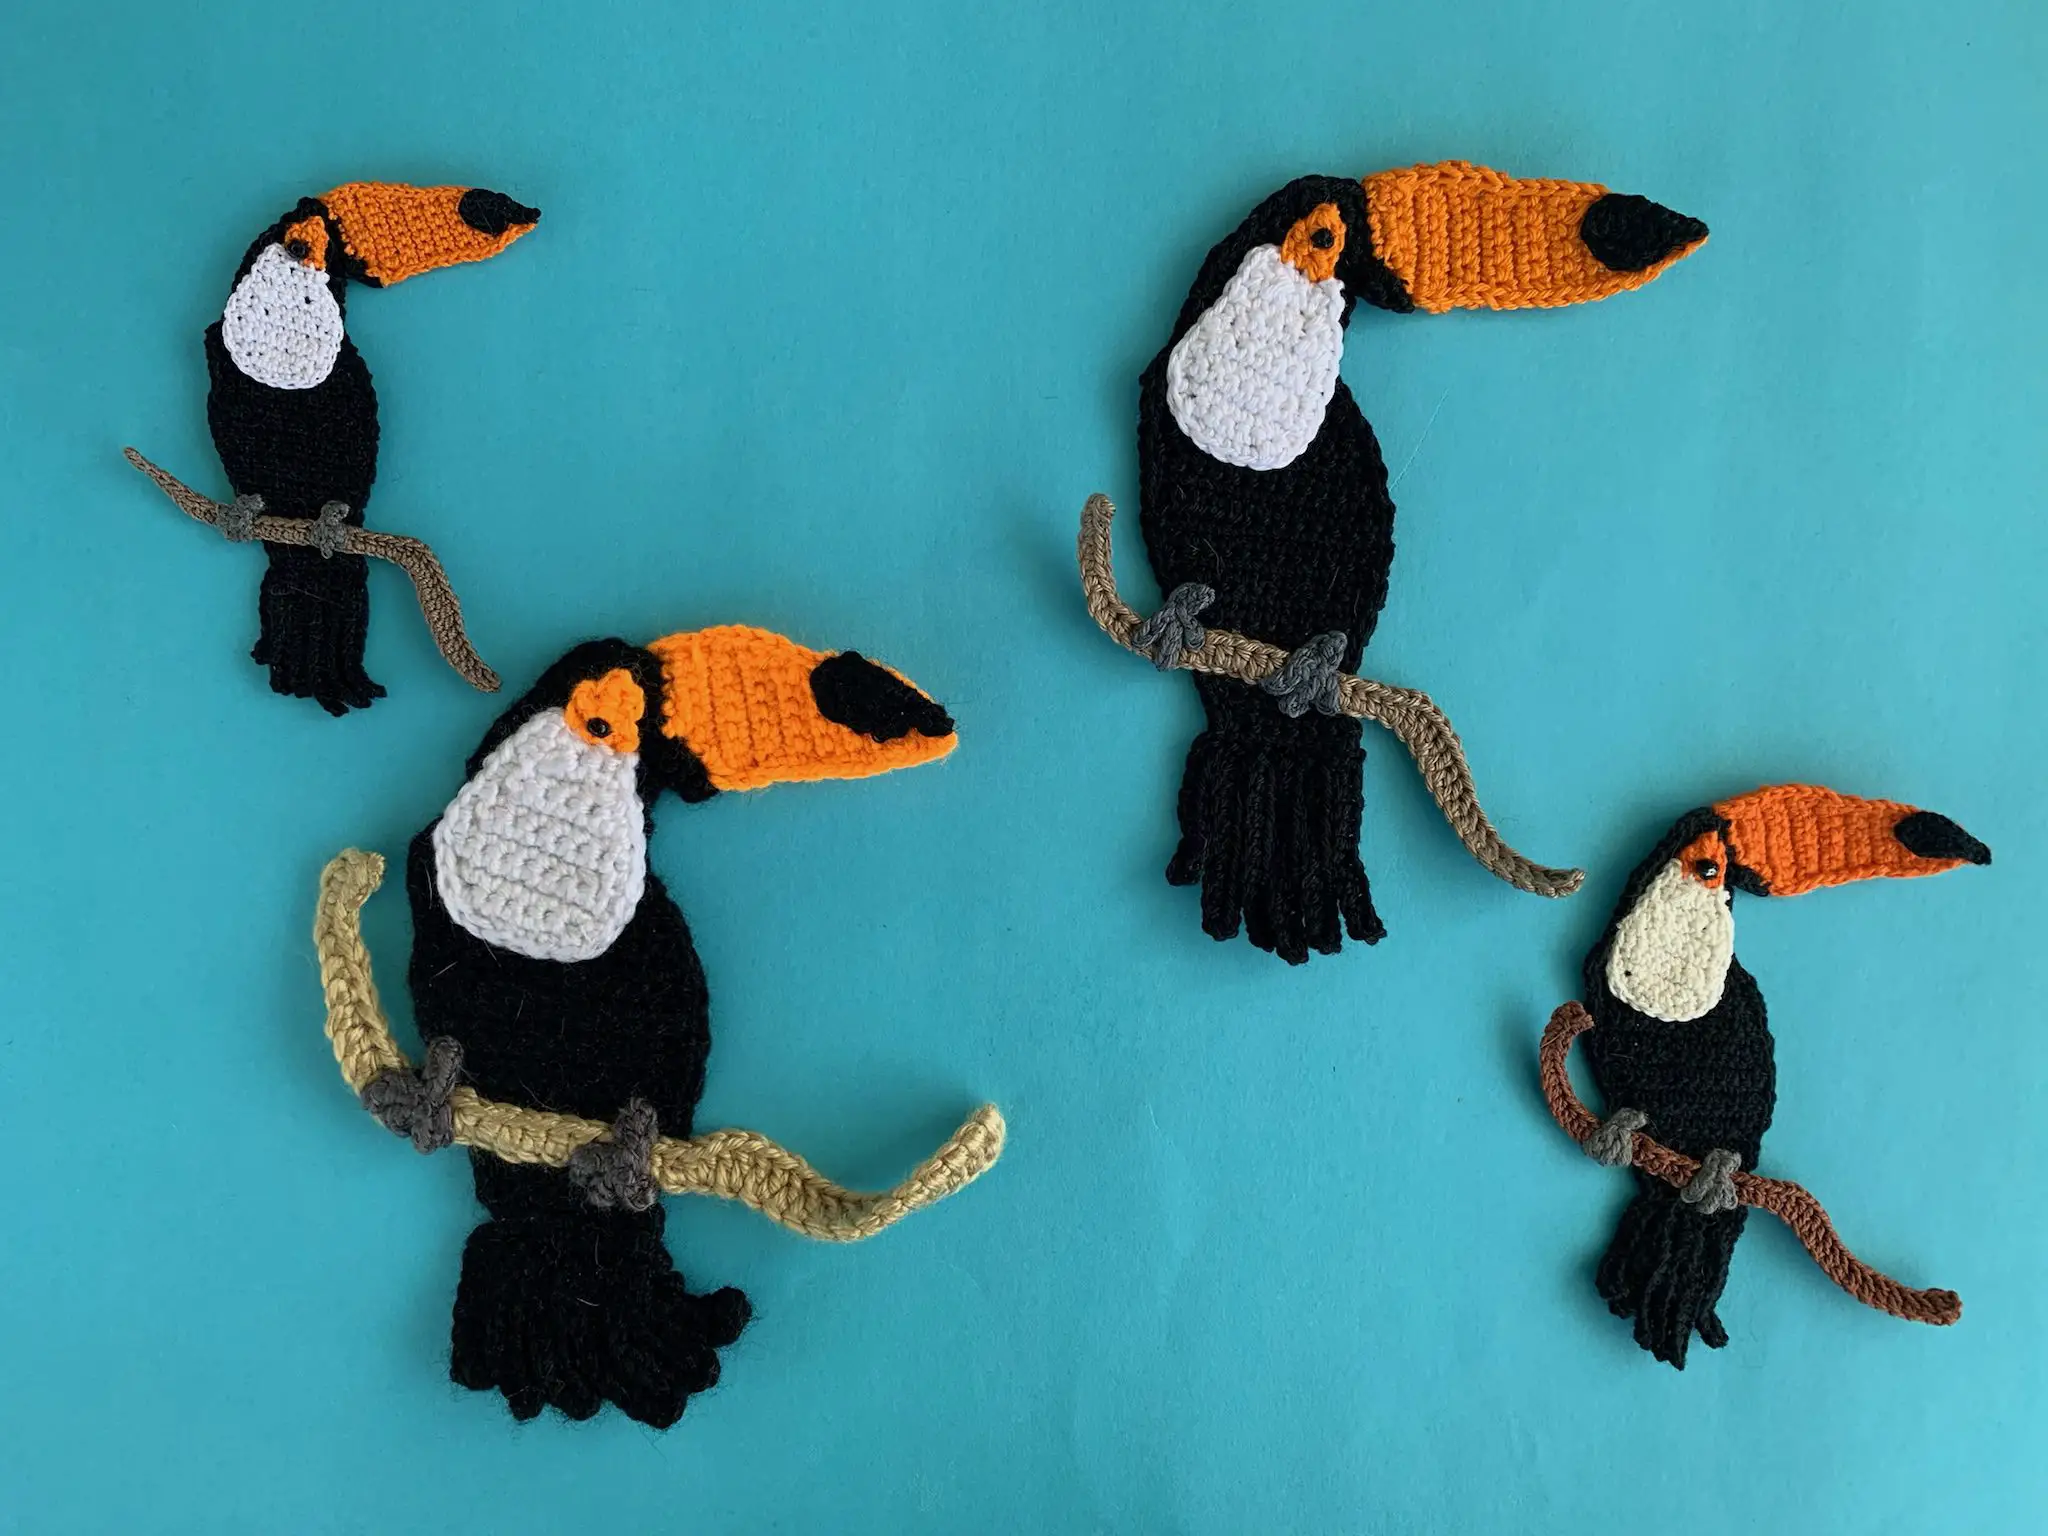 Finished crochet toucan 2 ply group landscape